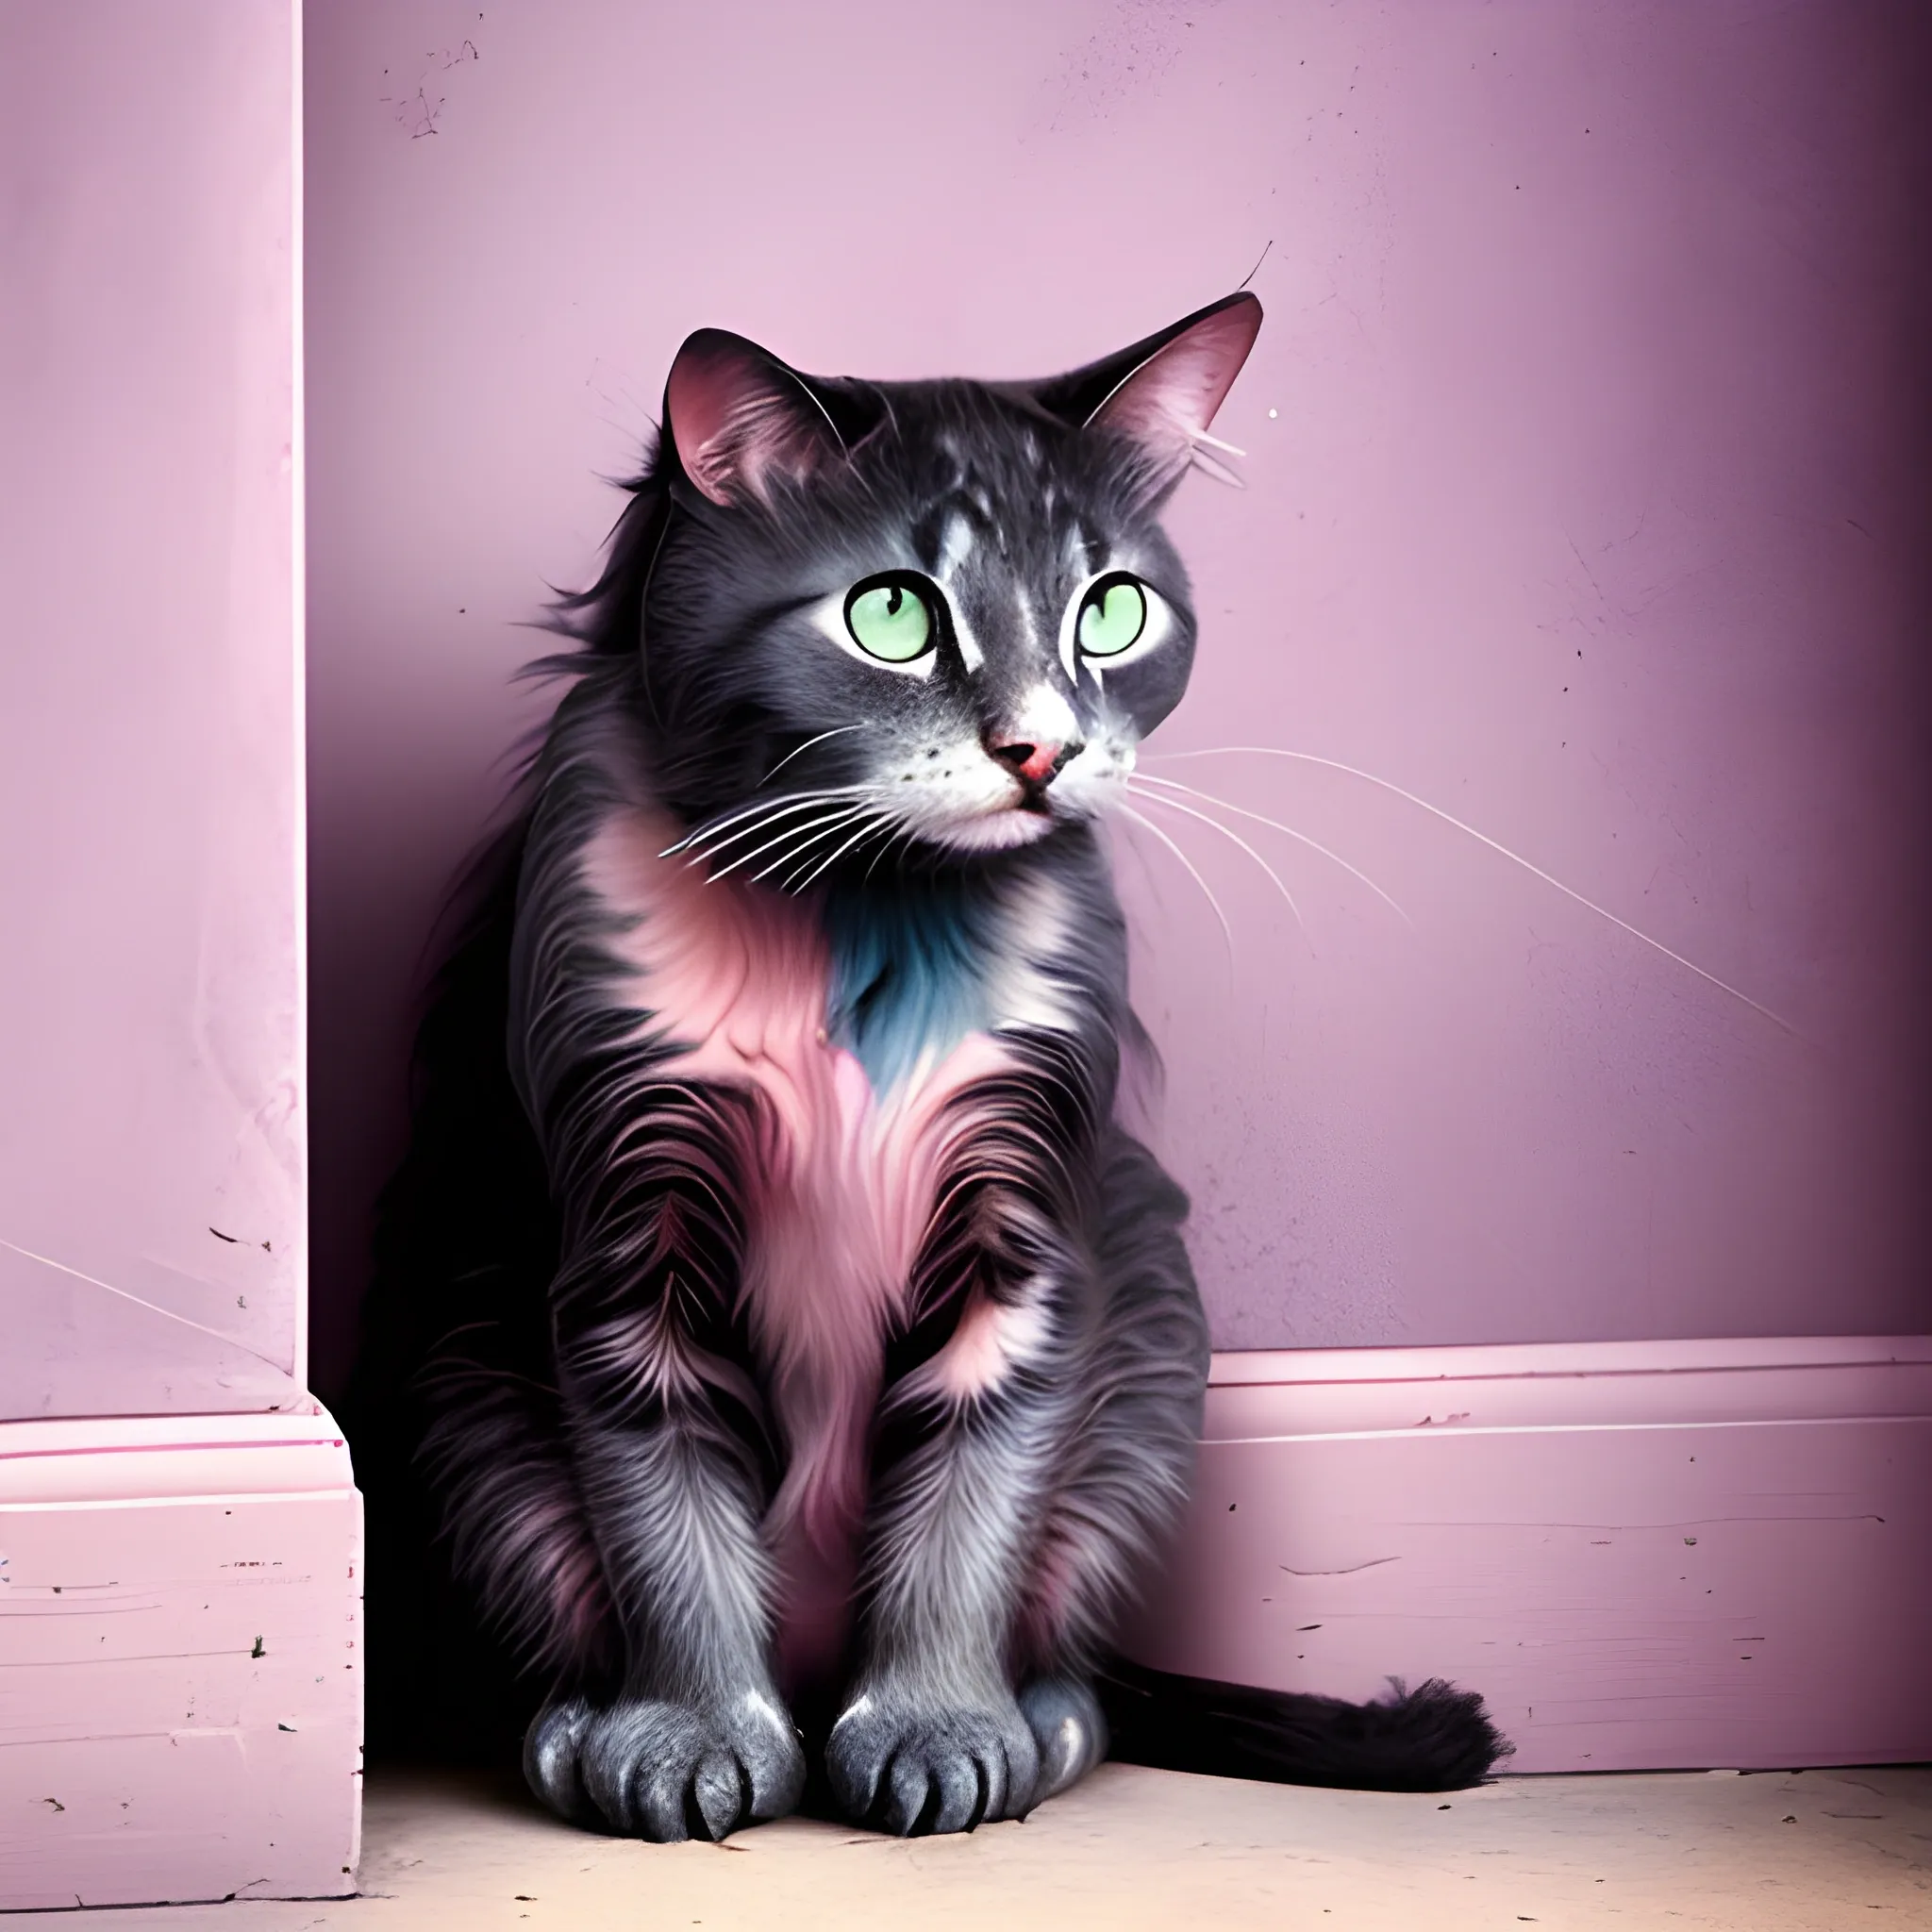 A brooding ragged cat sitting in the corner, deep in thought, stunning pastel colors